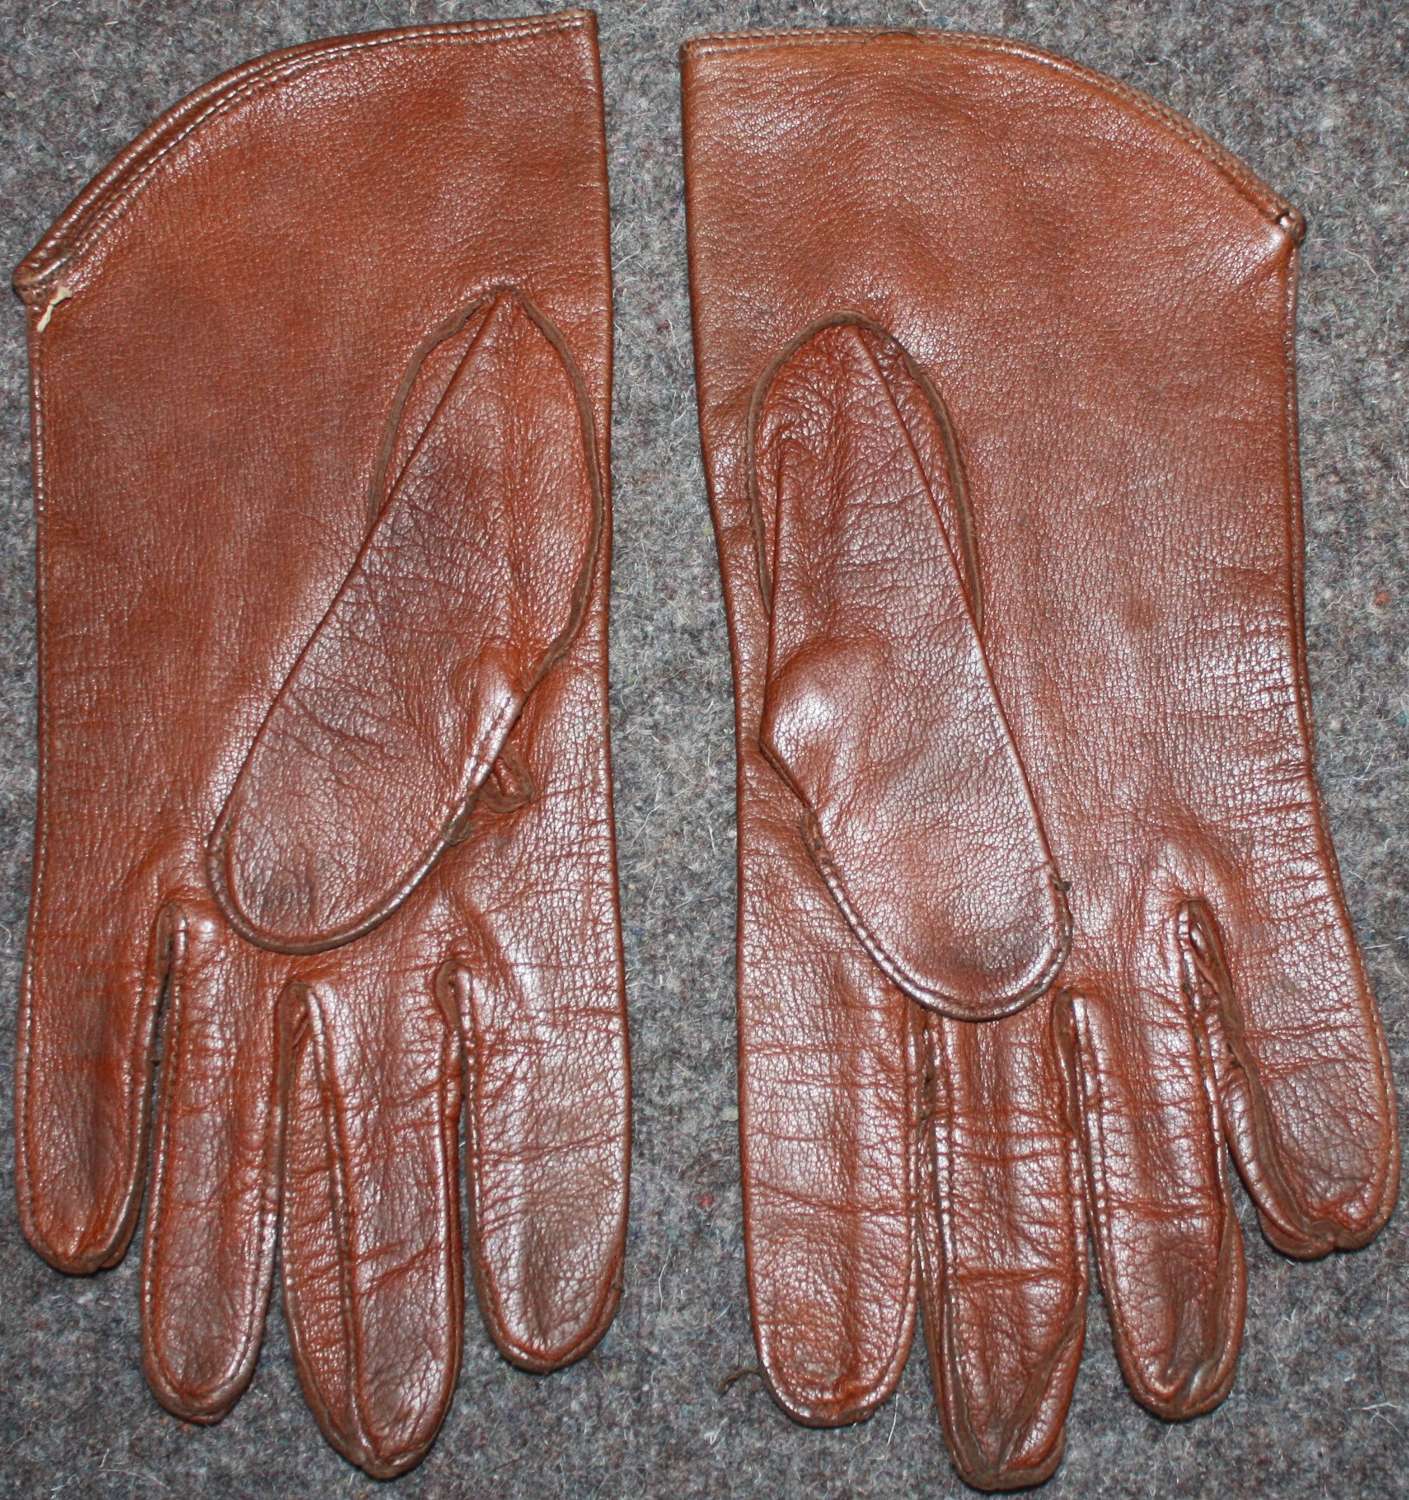 A PAIR OF OFFICERS STYLE GLOVES BRITISH MADE 1945 DATED OFFICERS